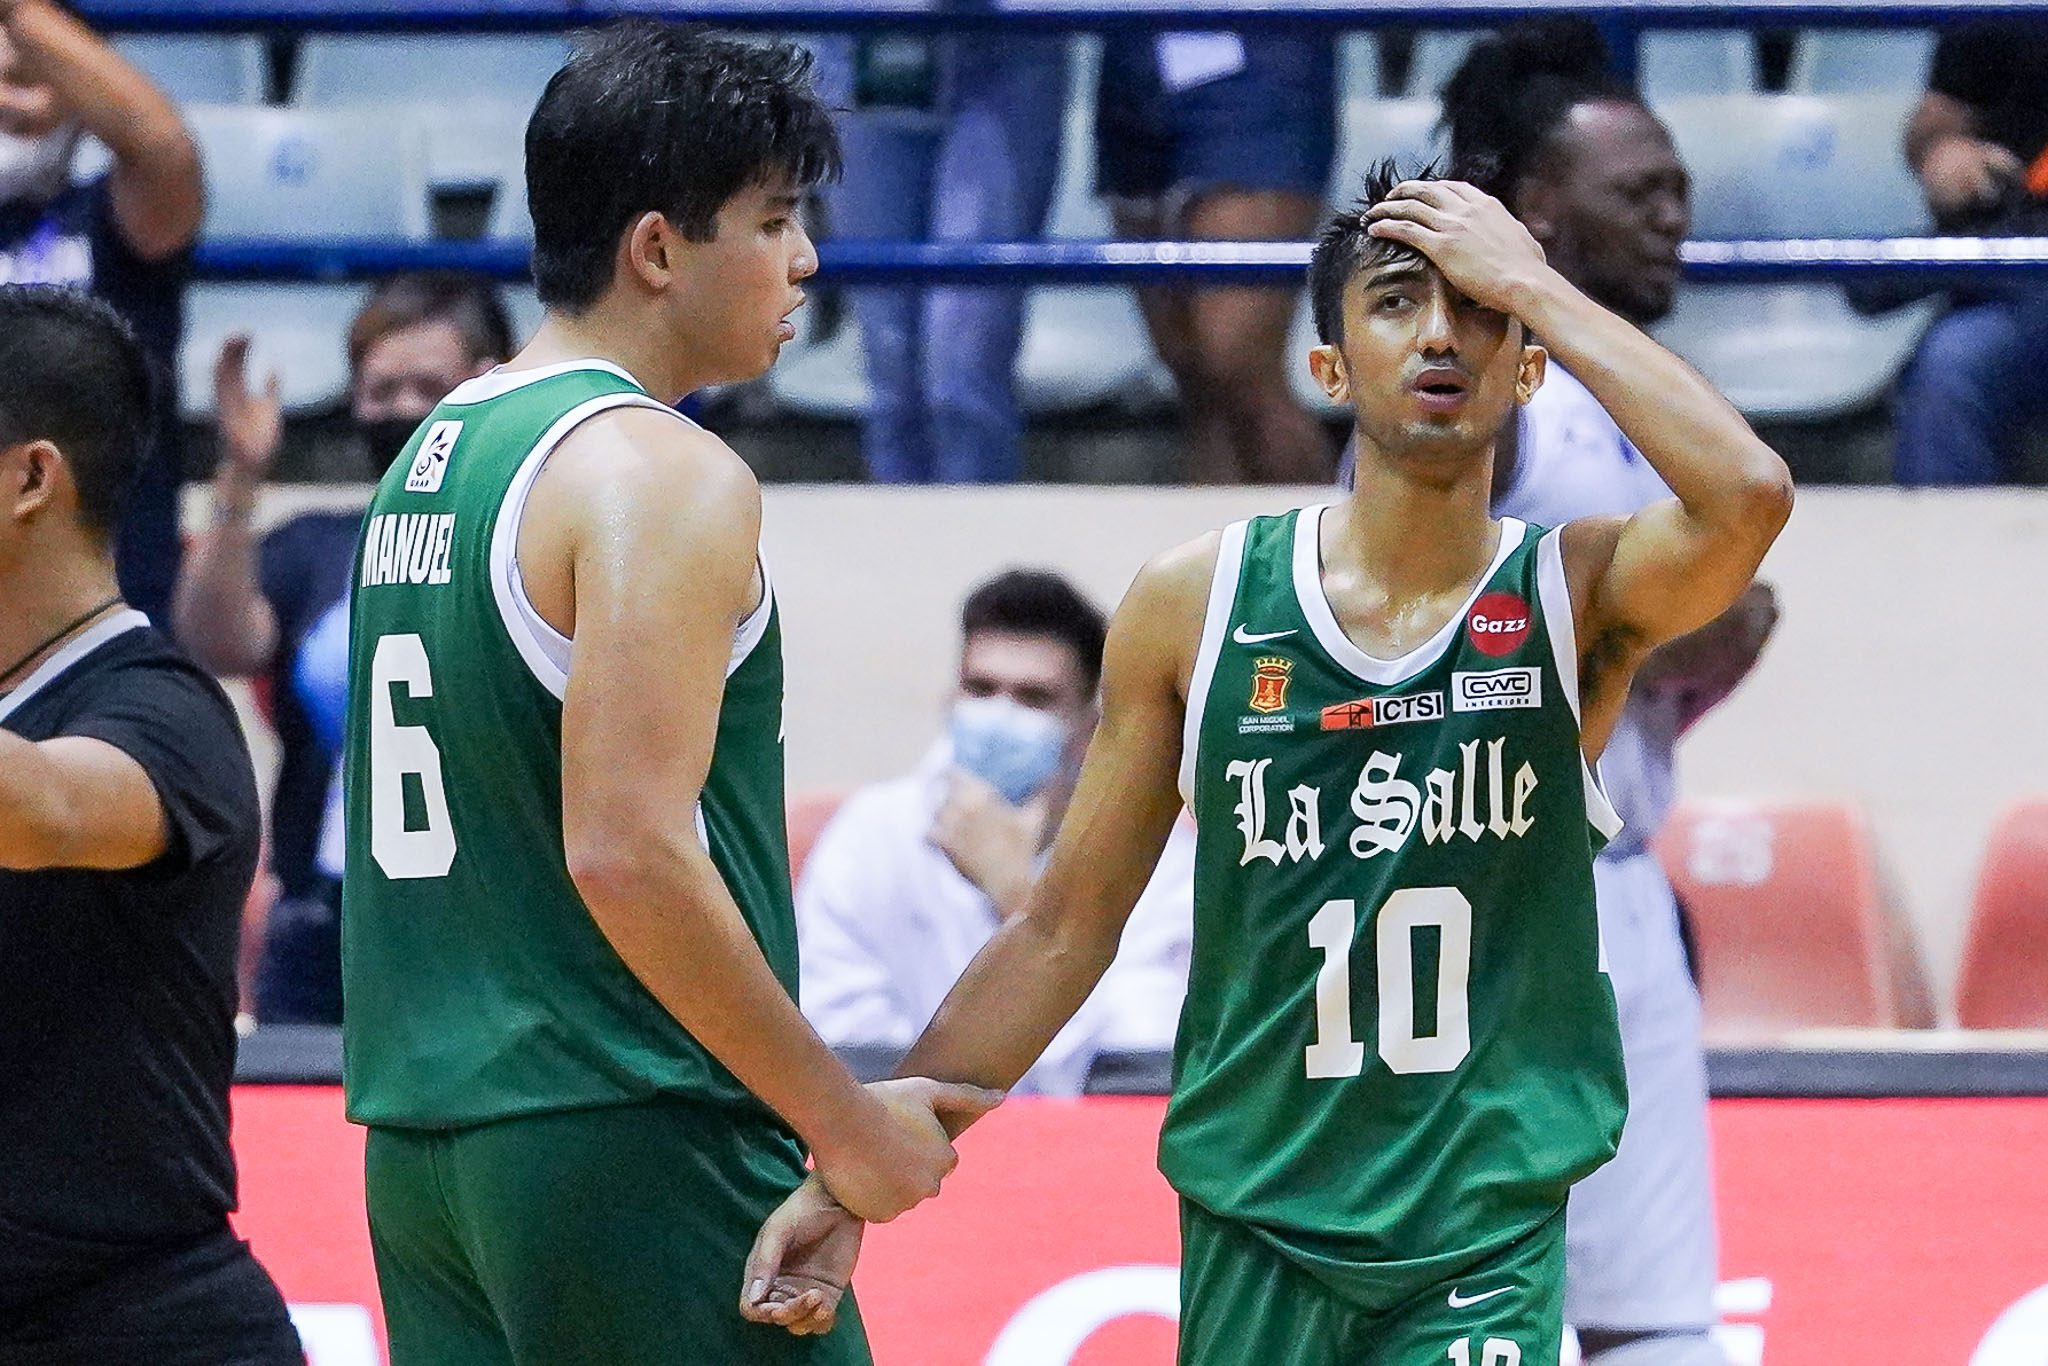 La Salle star Evan Nelle suspended one game for third unsportsmanlike foul